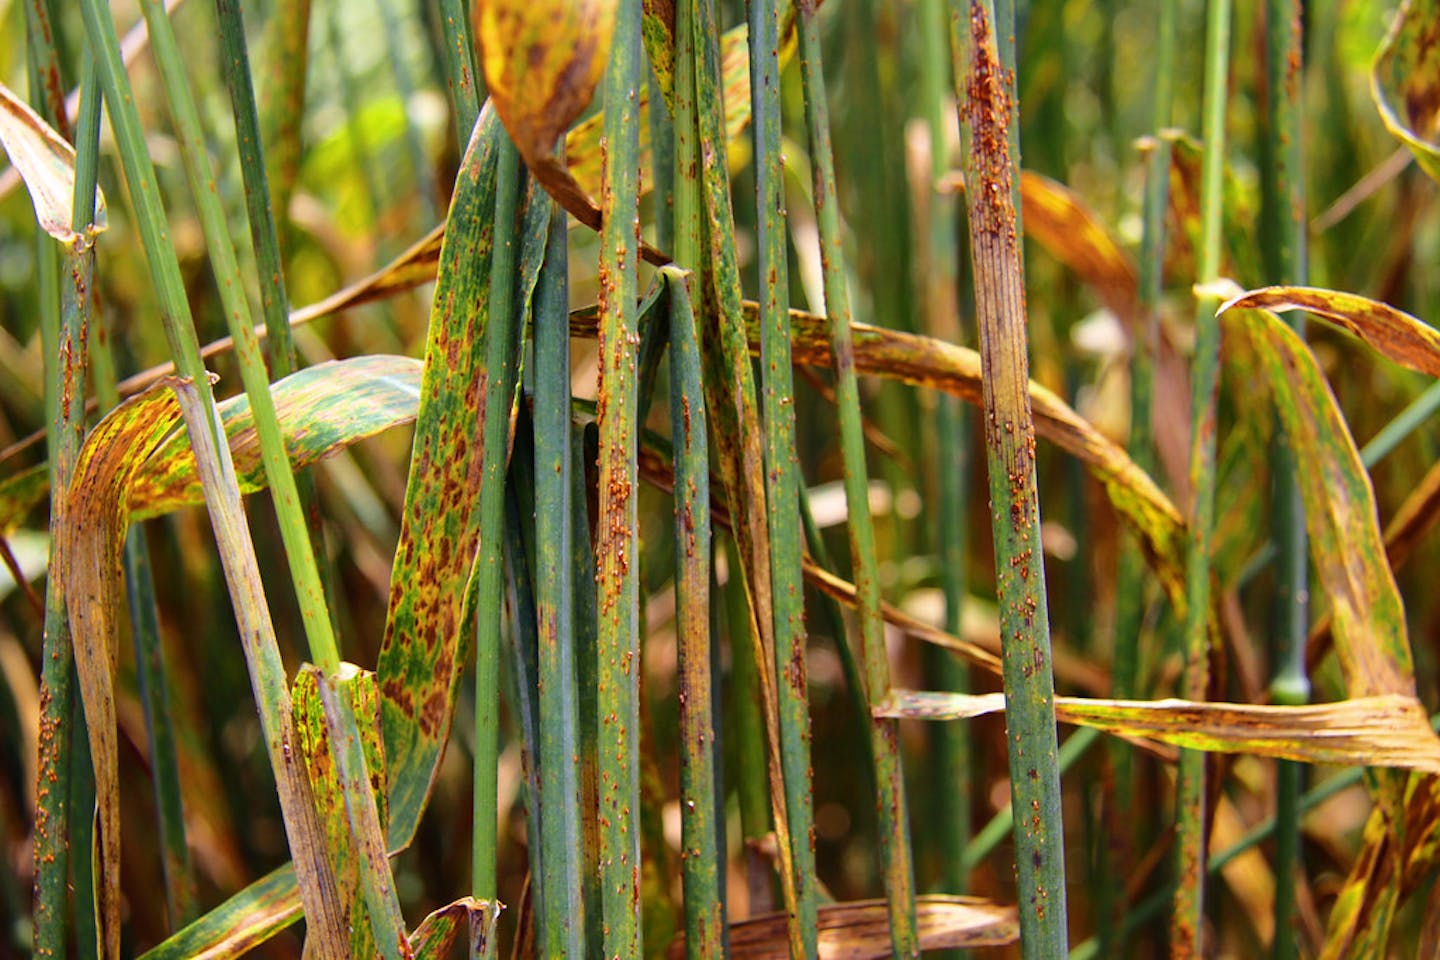 plant with wheat stem rust disease